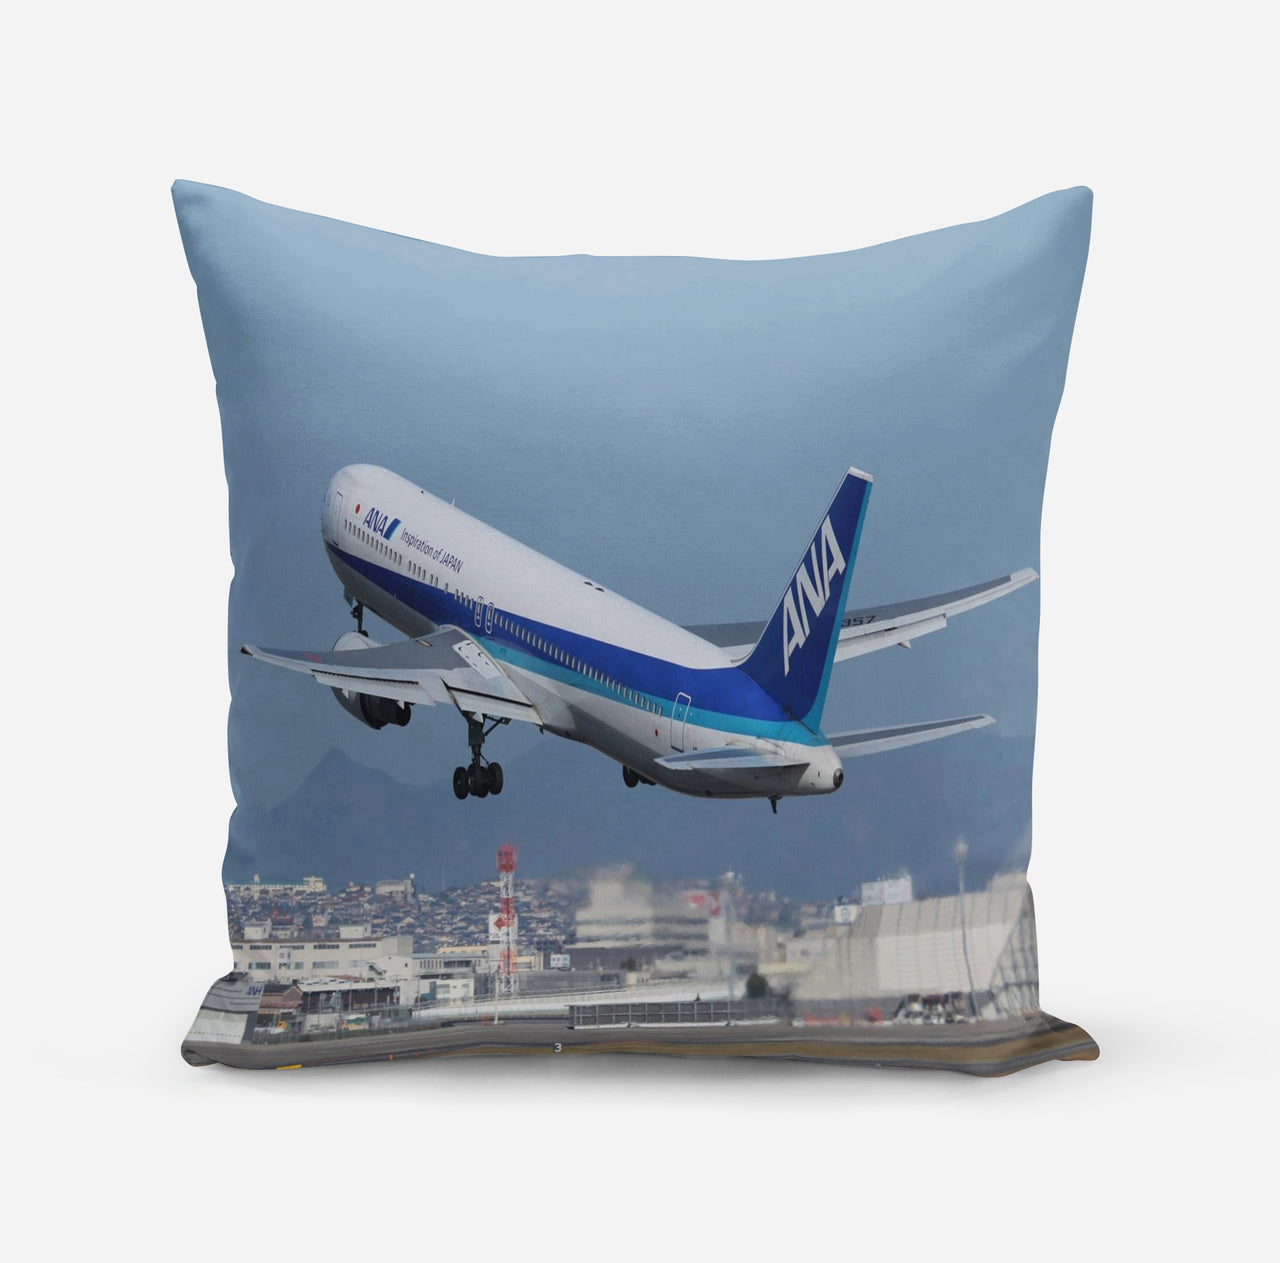 Departing ANA's Boeing 767 Designed Pillows